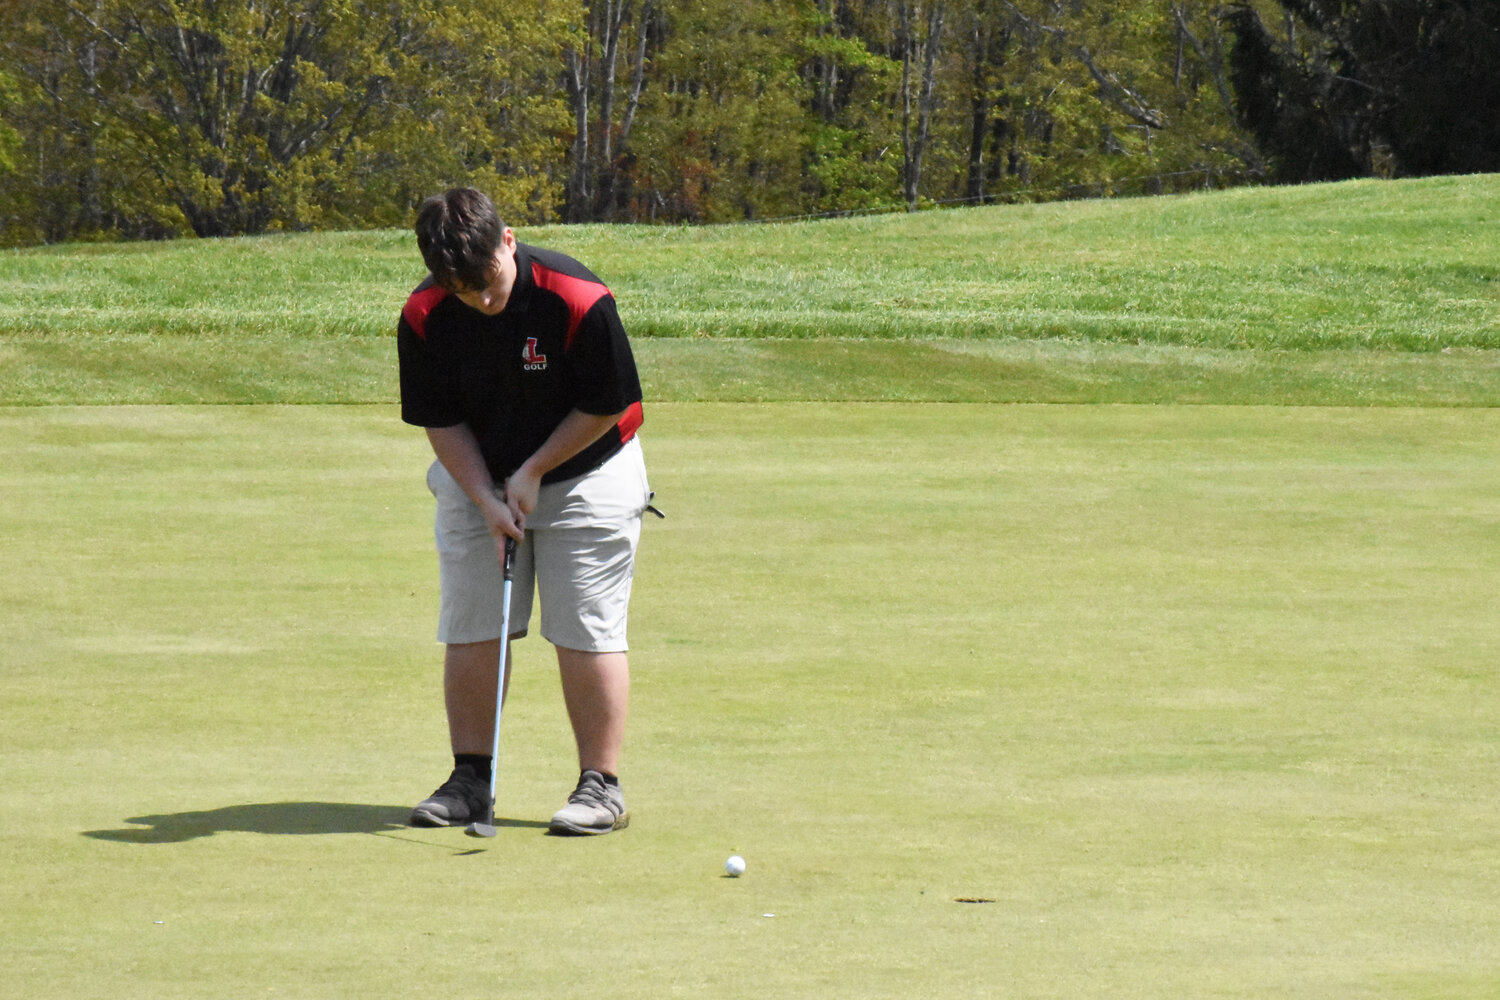 Liberty’s Larry Whipple putts on the 9th hole before moving on to finish the round.